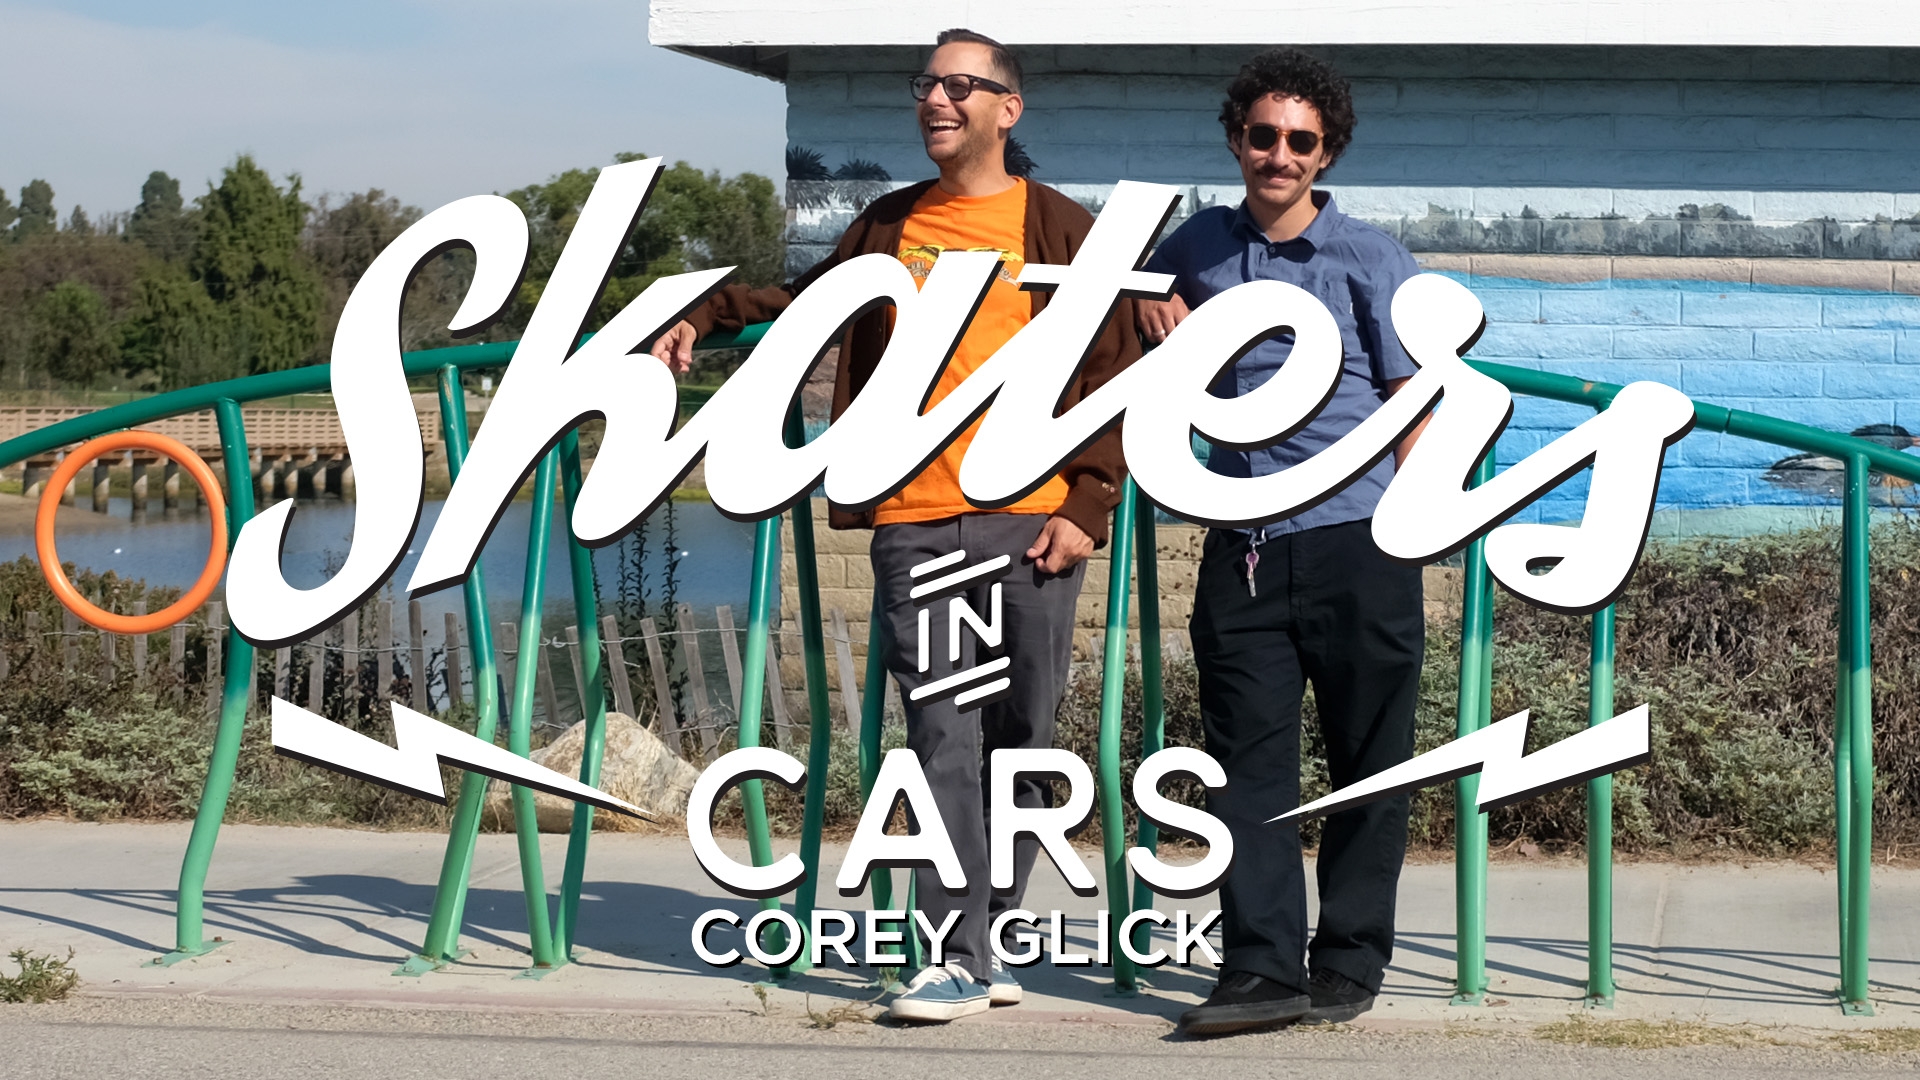 Skaters In Cars Looking At Spots: Corey Glick